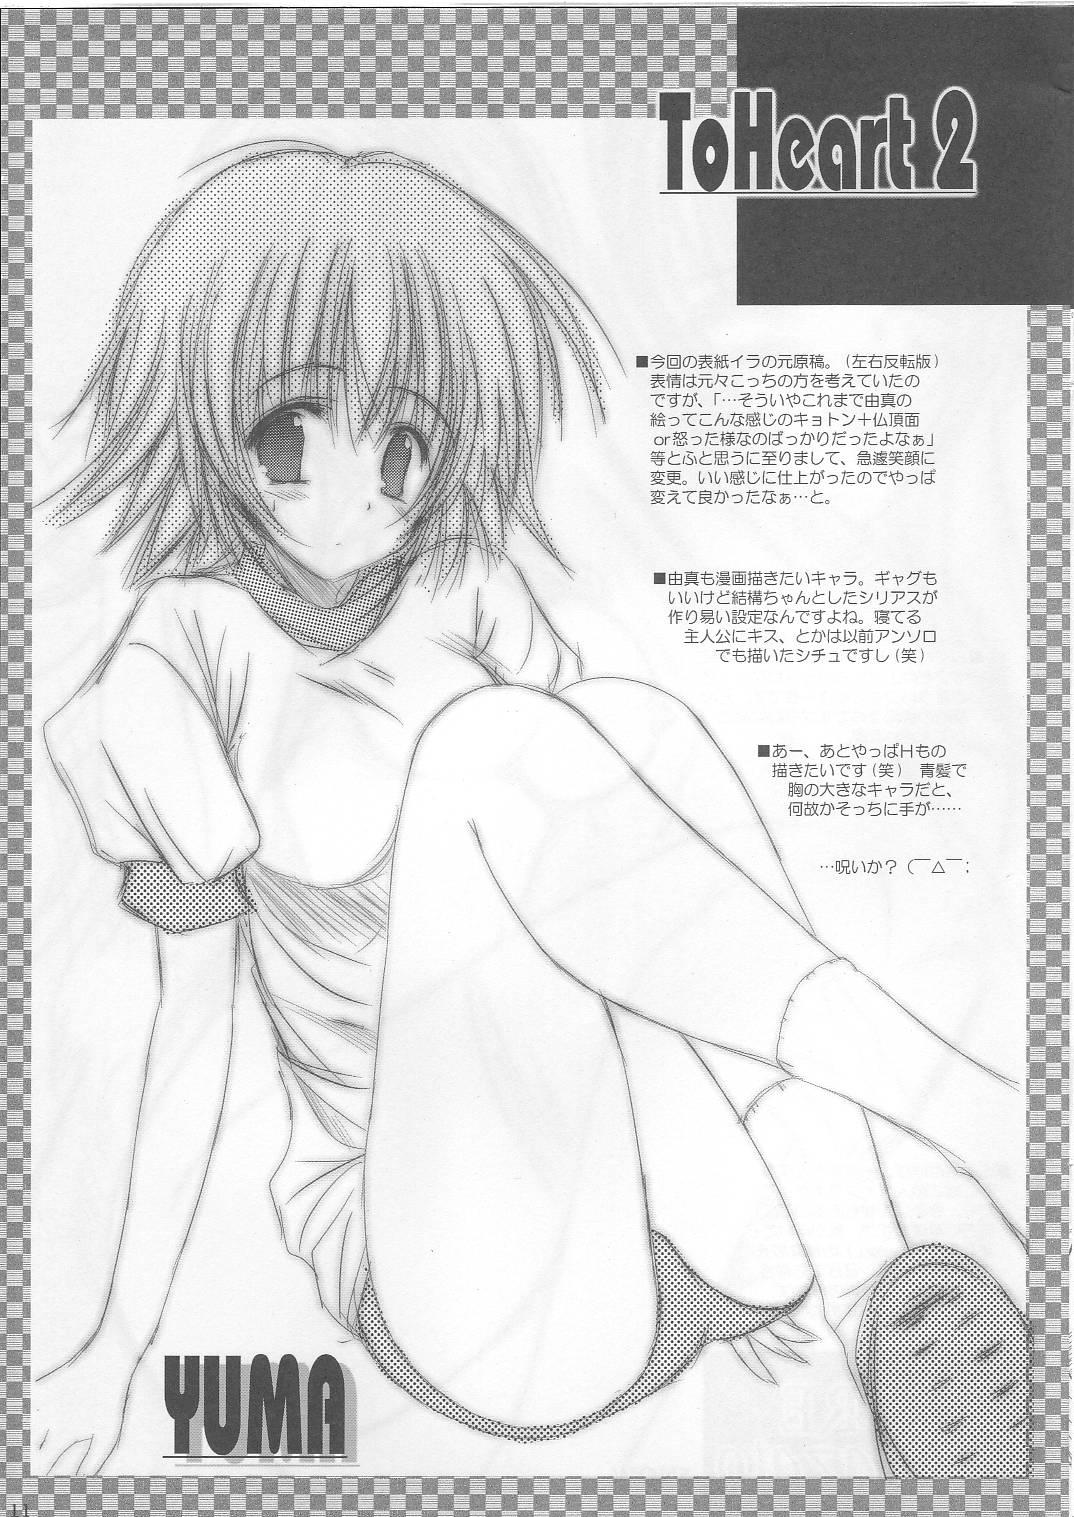 Cams VISION XIII - Toheart2 Fate hollow ataraxia Ftvgirls - Page 10